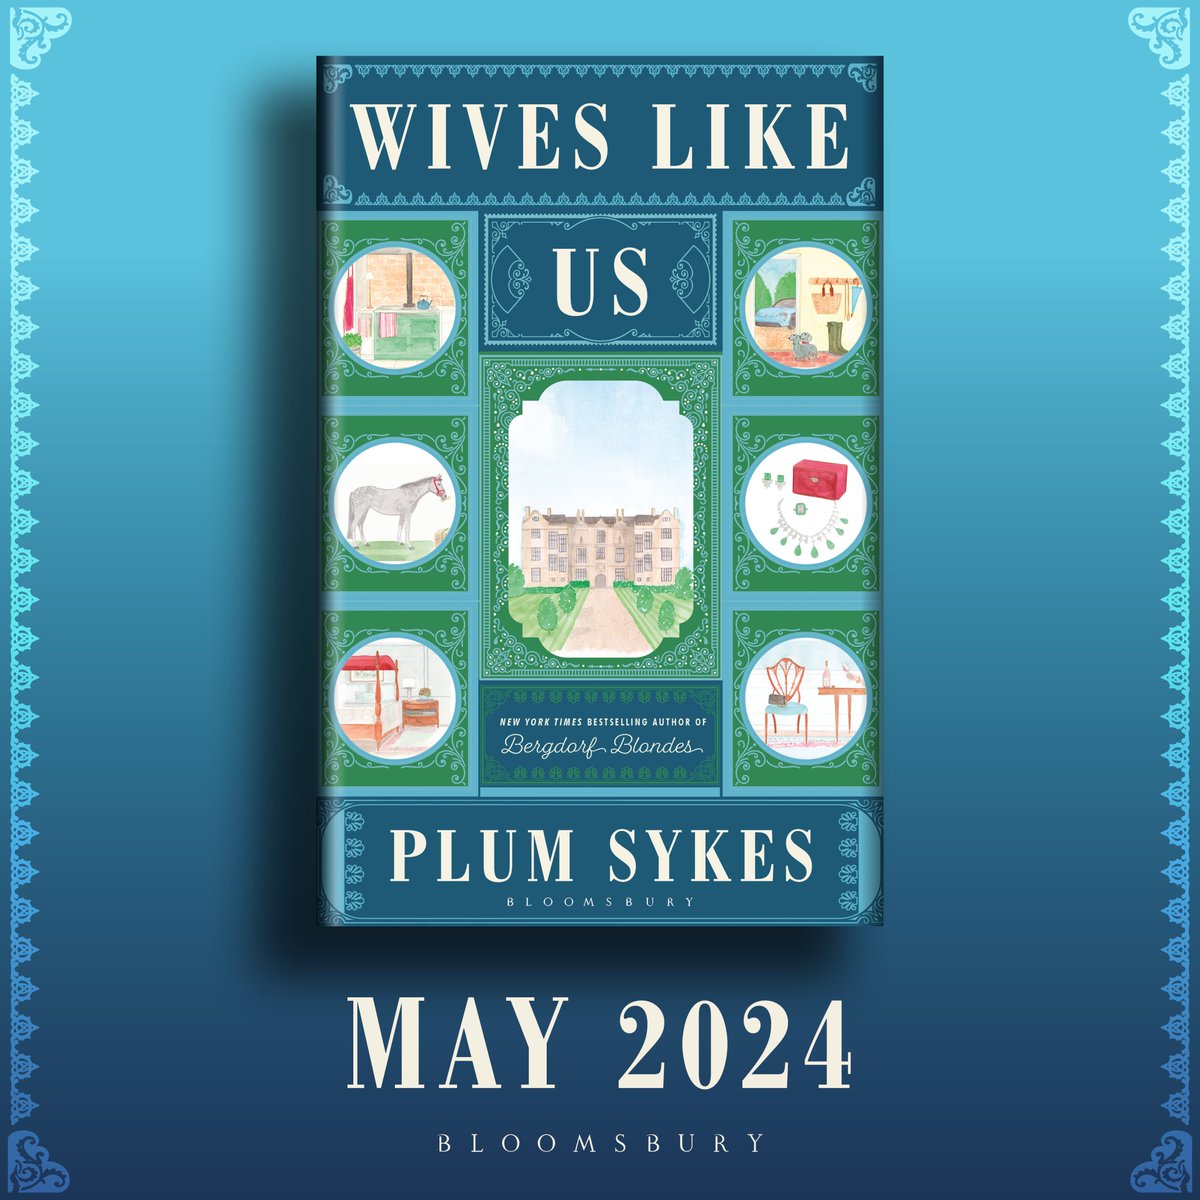 If you think the English countryside is all green wellies, muddy Land Rovers and grey-haired ladies in tweed, then you've never visited 'The Bottoms'… Introducing the cover for WIVES LIKE US, the impossibly funny new novel from @plumsykes, coming 14 May 2024!